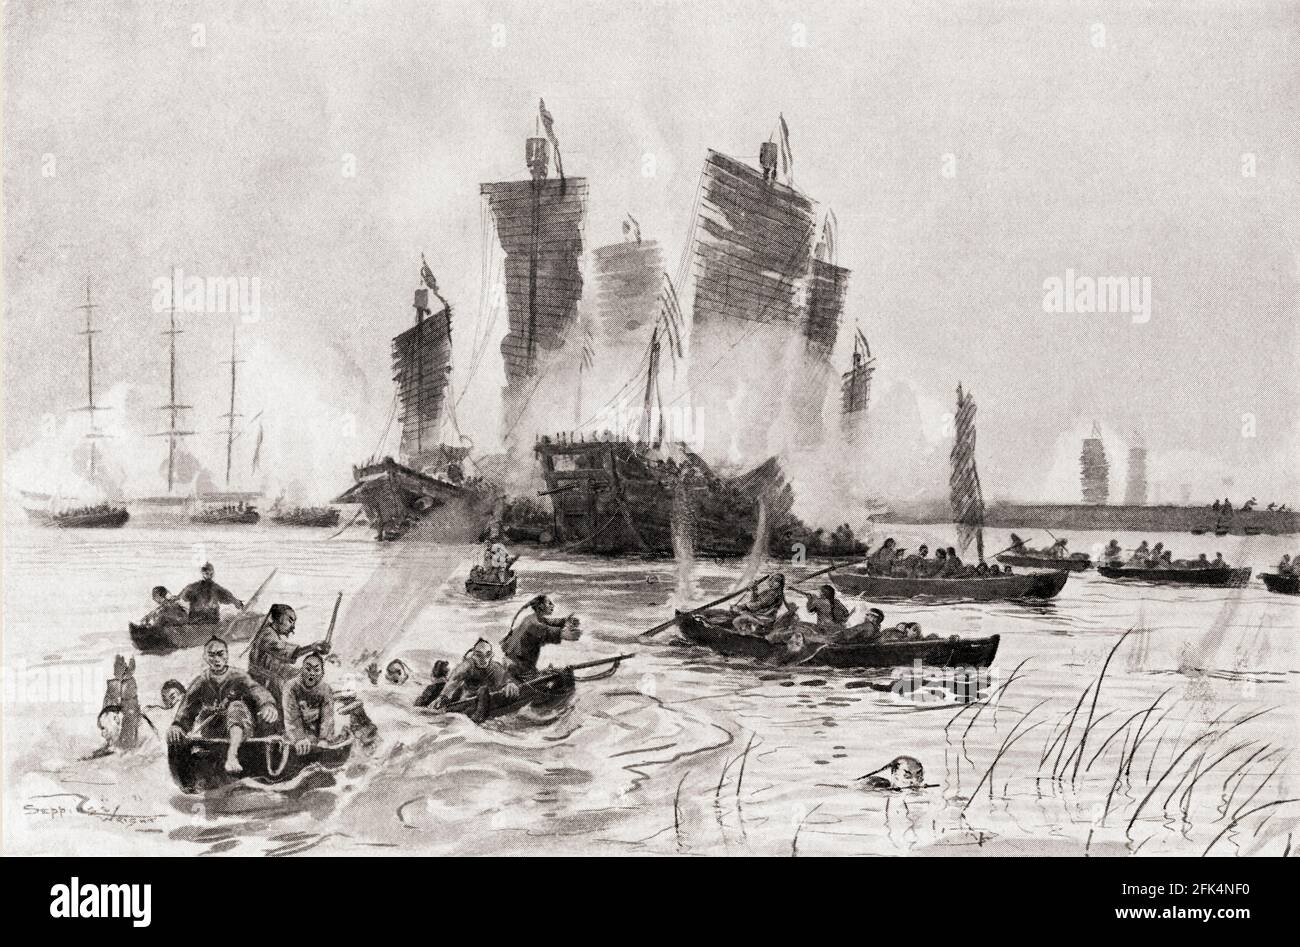 A sea battle between the Imperial Chinese navy and pirate junks during the 19th century. Stock Photo